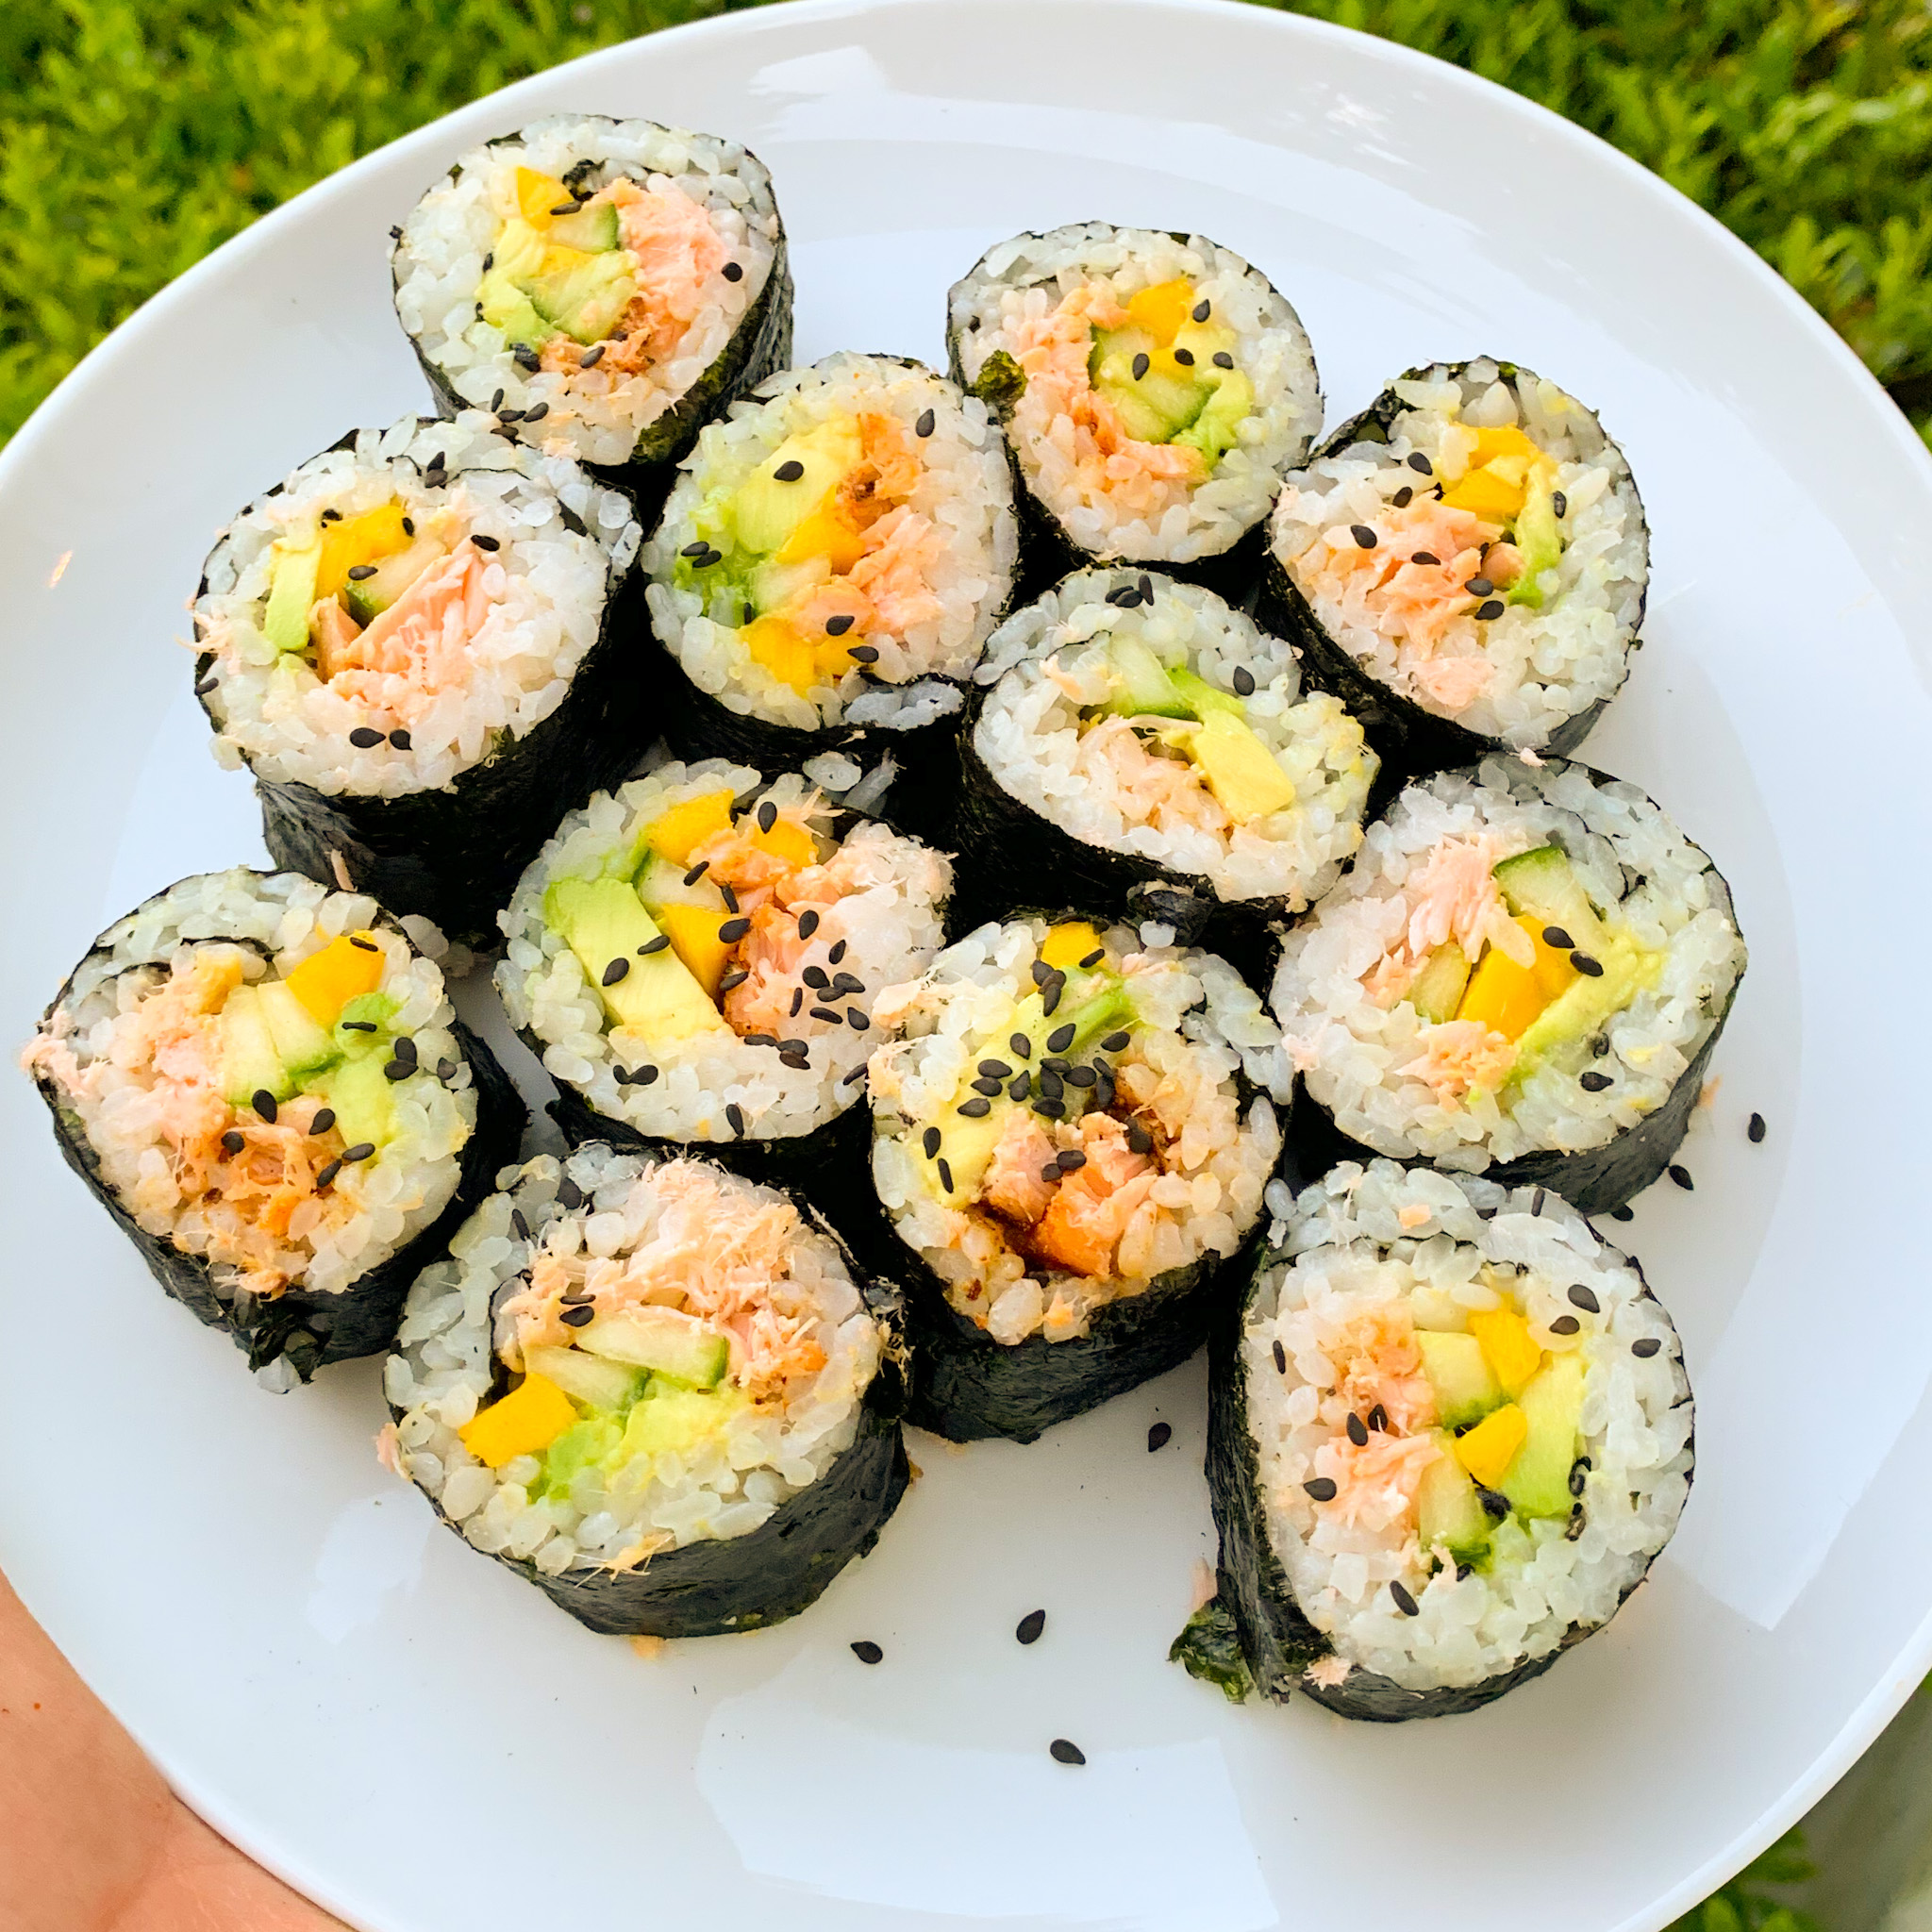 the finished gluten free homemade salmon sushi roll